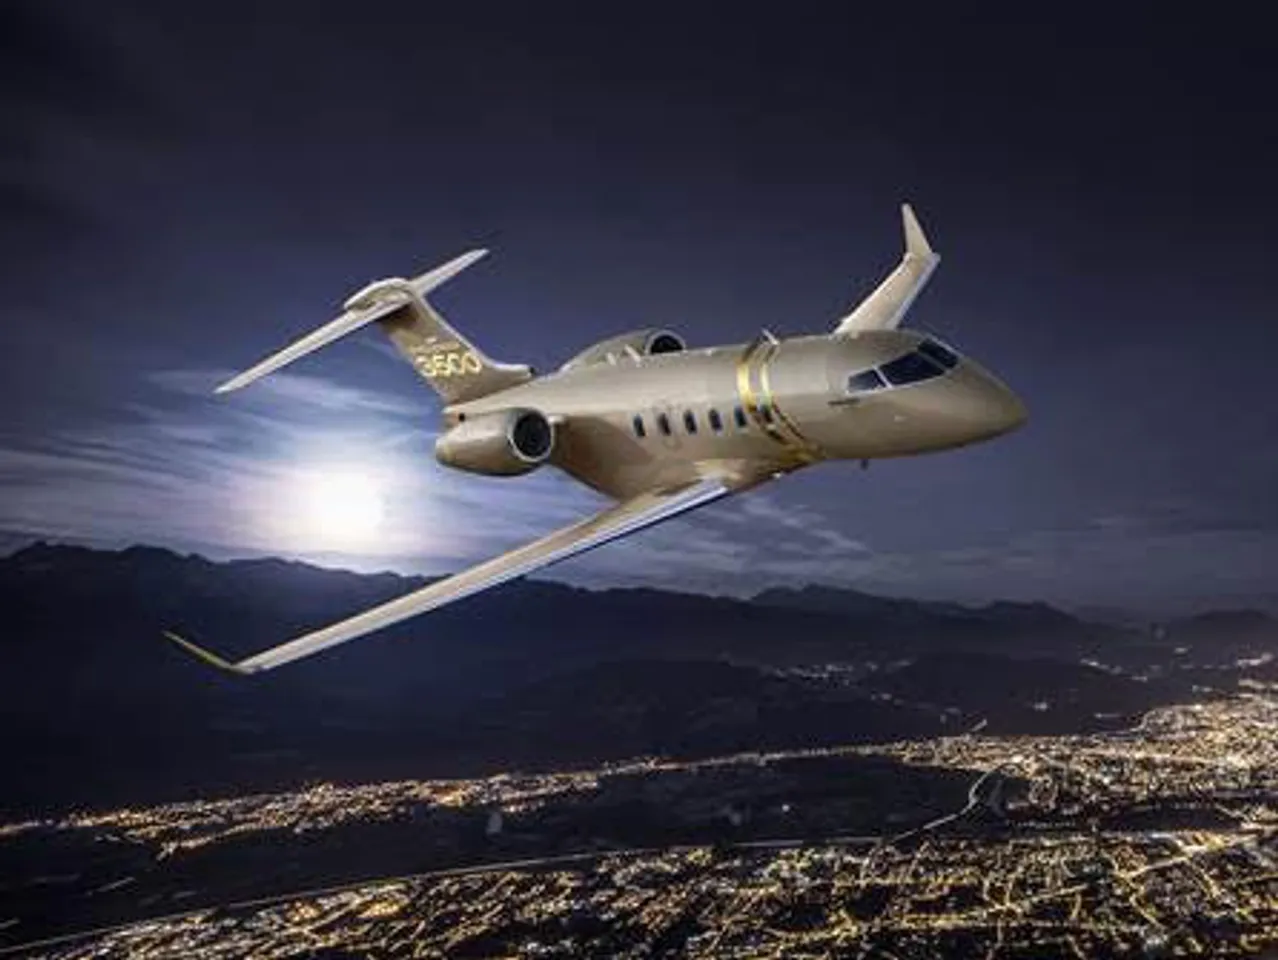 Bmbardier’s Challenger 3500 Leverages SITA-Powered Eco App To Control Jet's Carbon Footprint